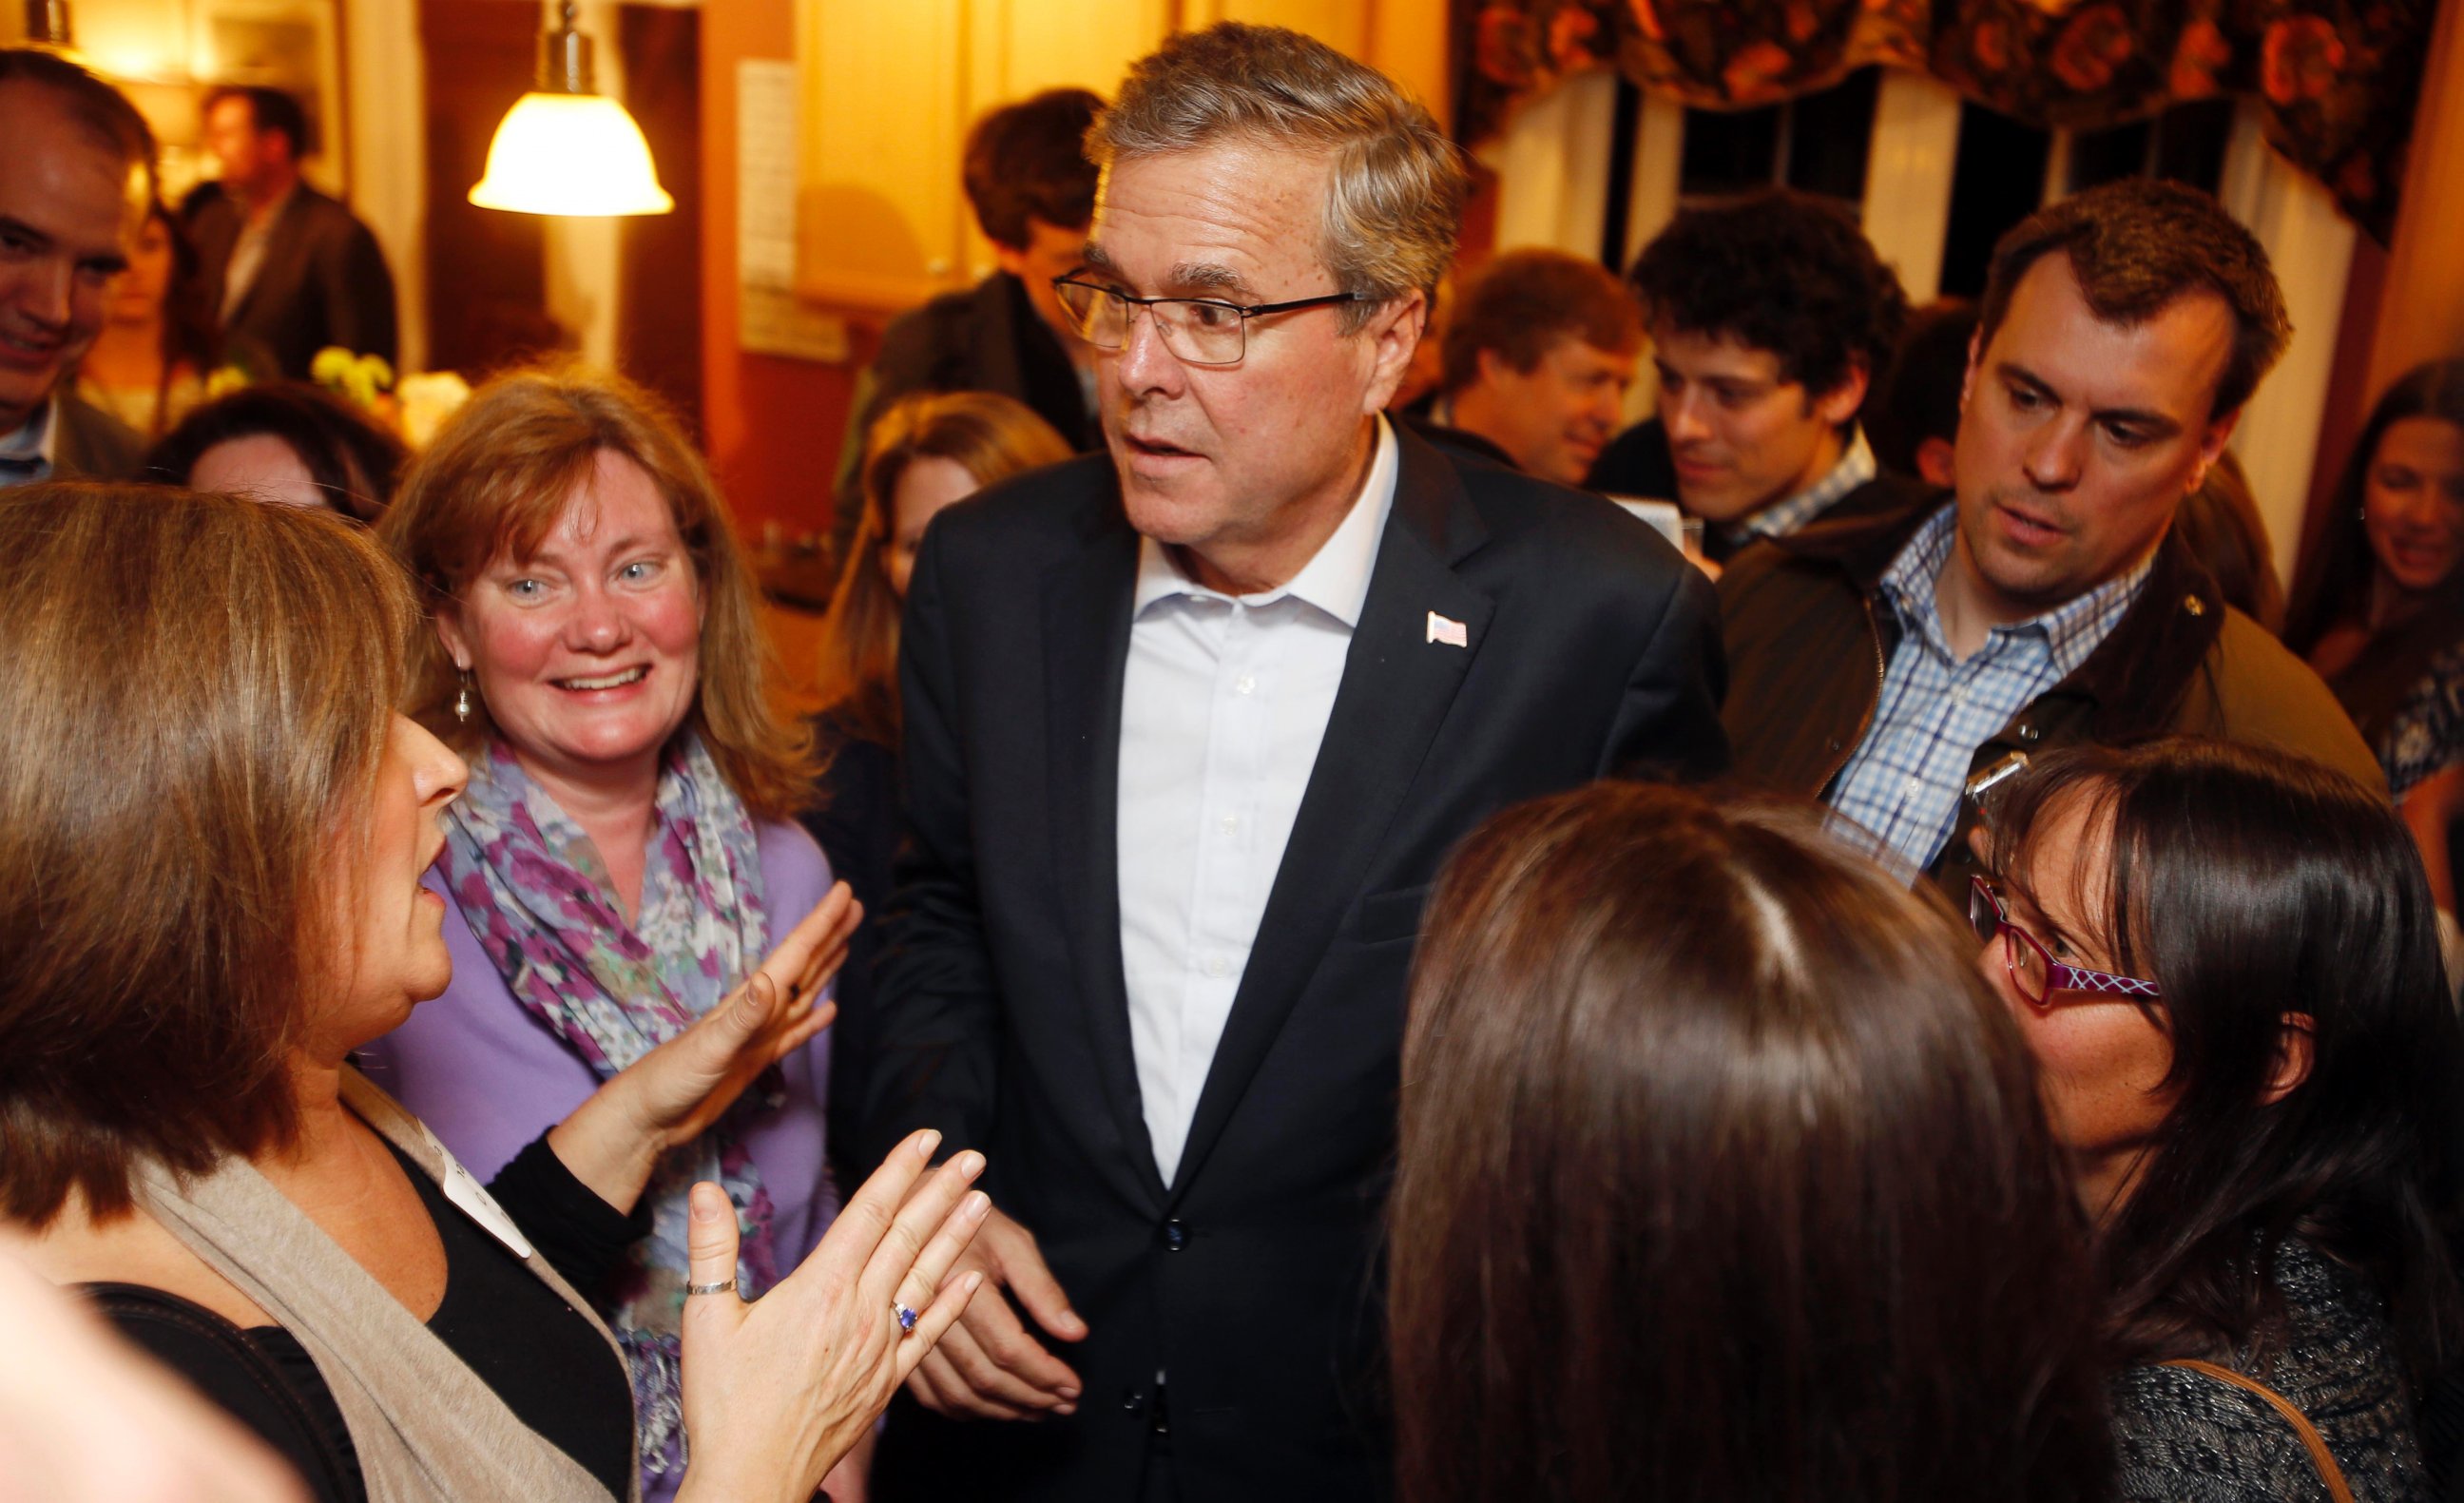 Florida Gov. Jeb Bush speaks with area residents at a packed house party Friday, March 13, 2015, in Dover, N.H. 